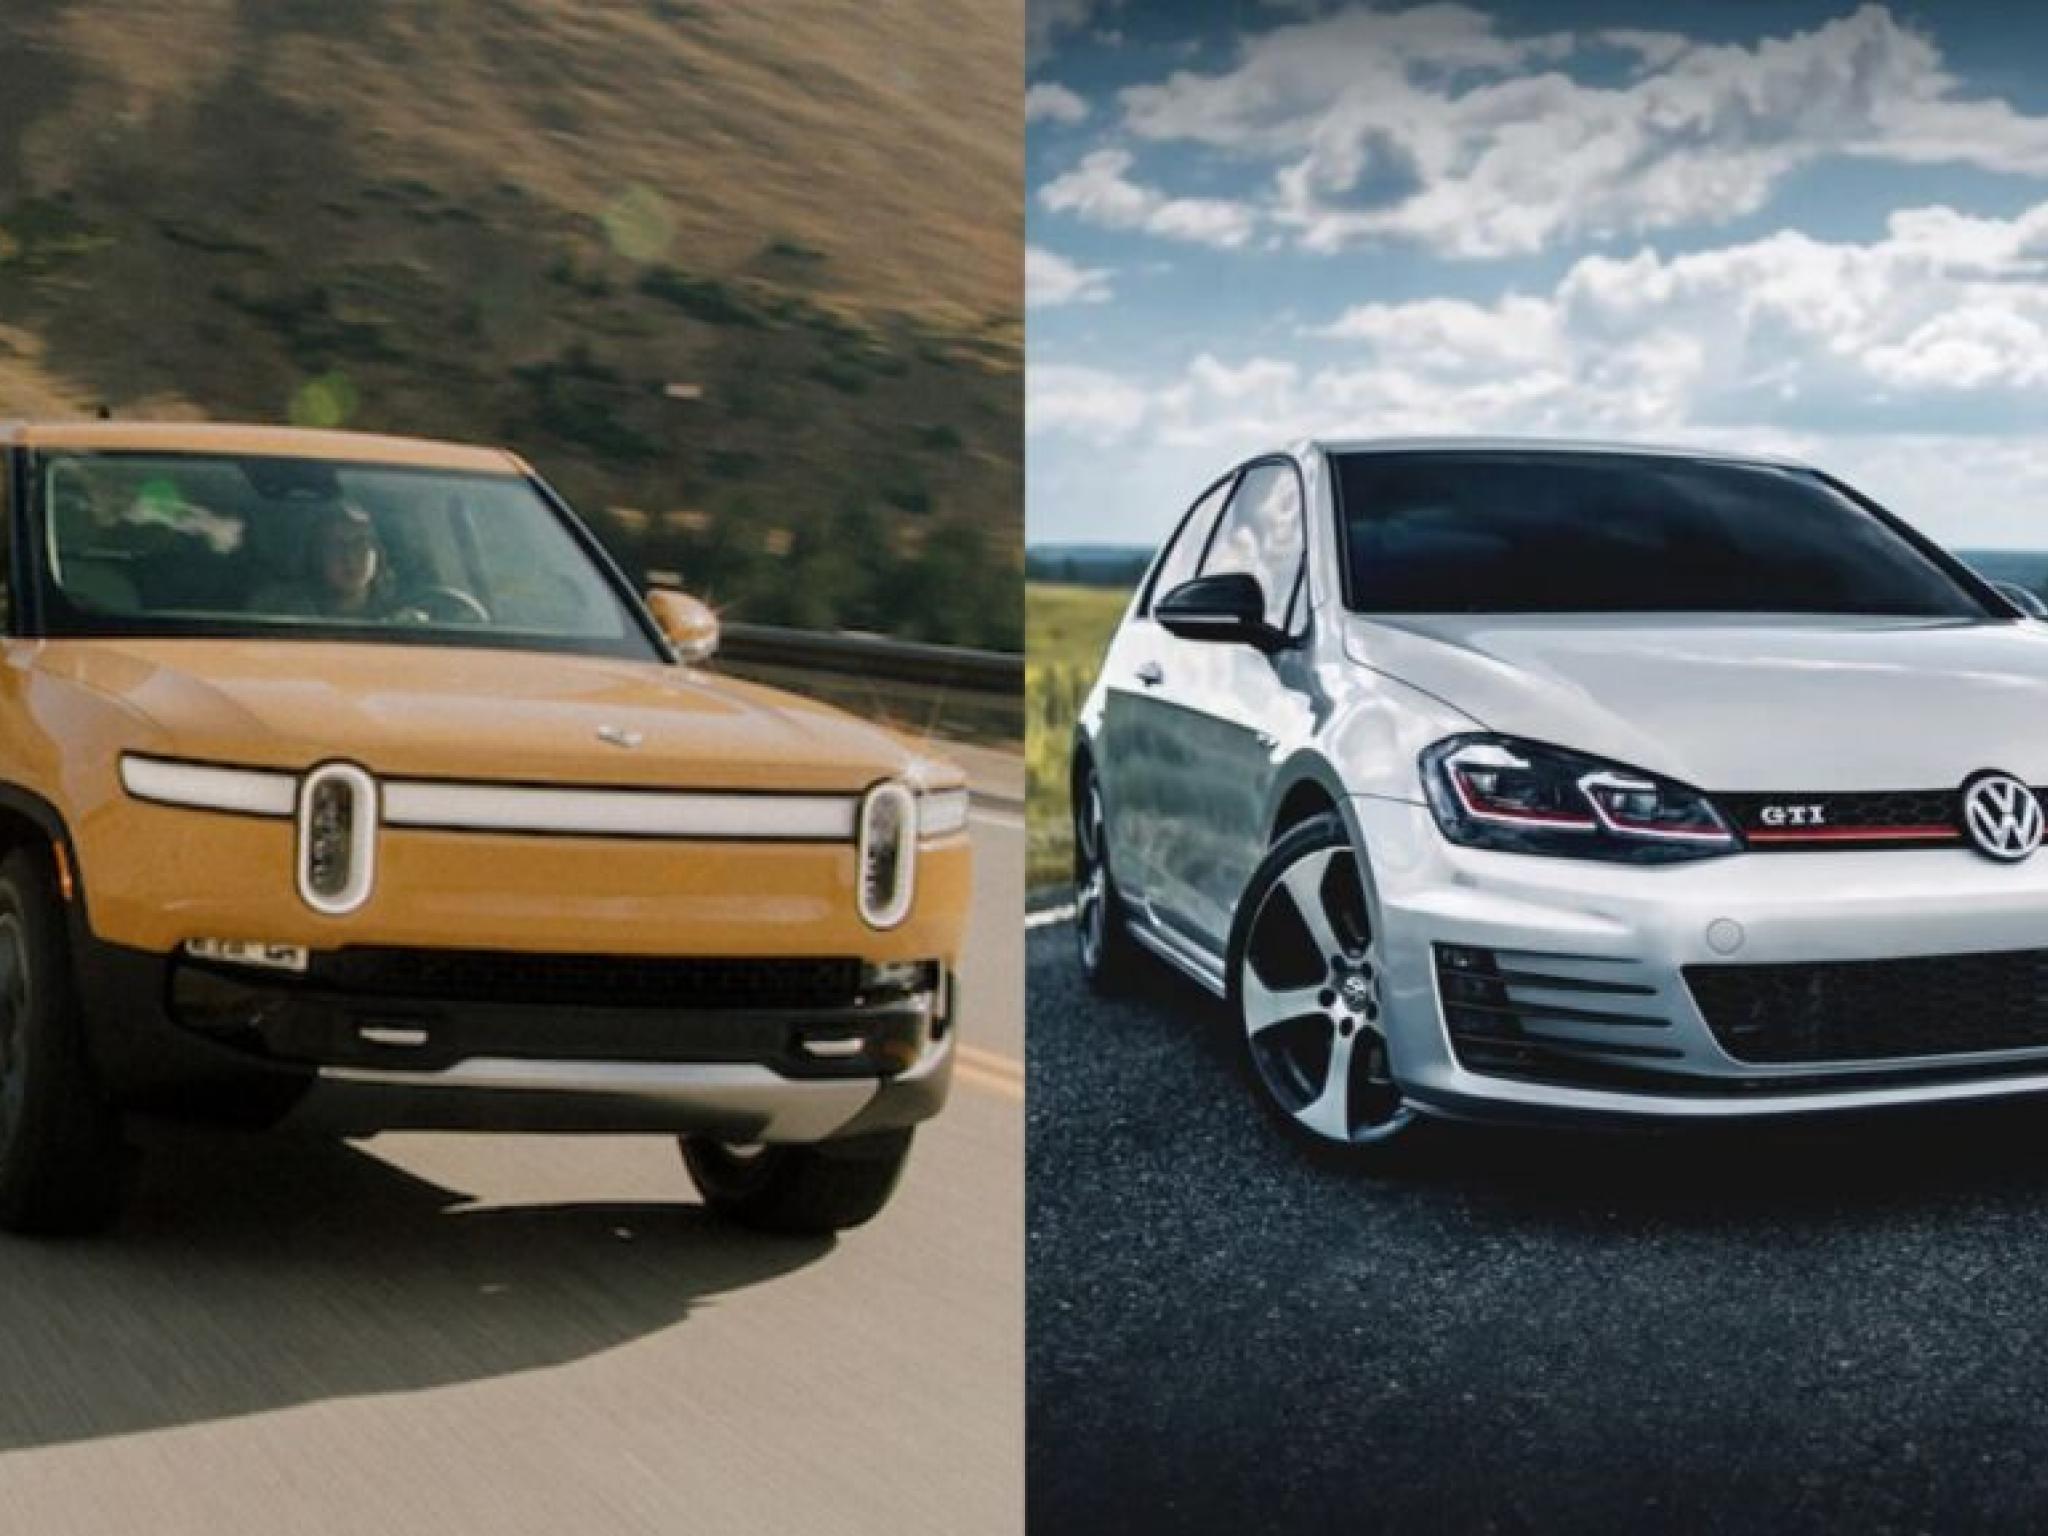  rivian-volkswagen-partnership-a-game-changer-says-one-analyst-a-mystery-says-another 